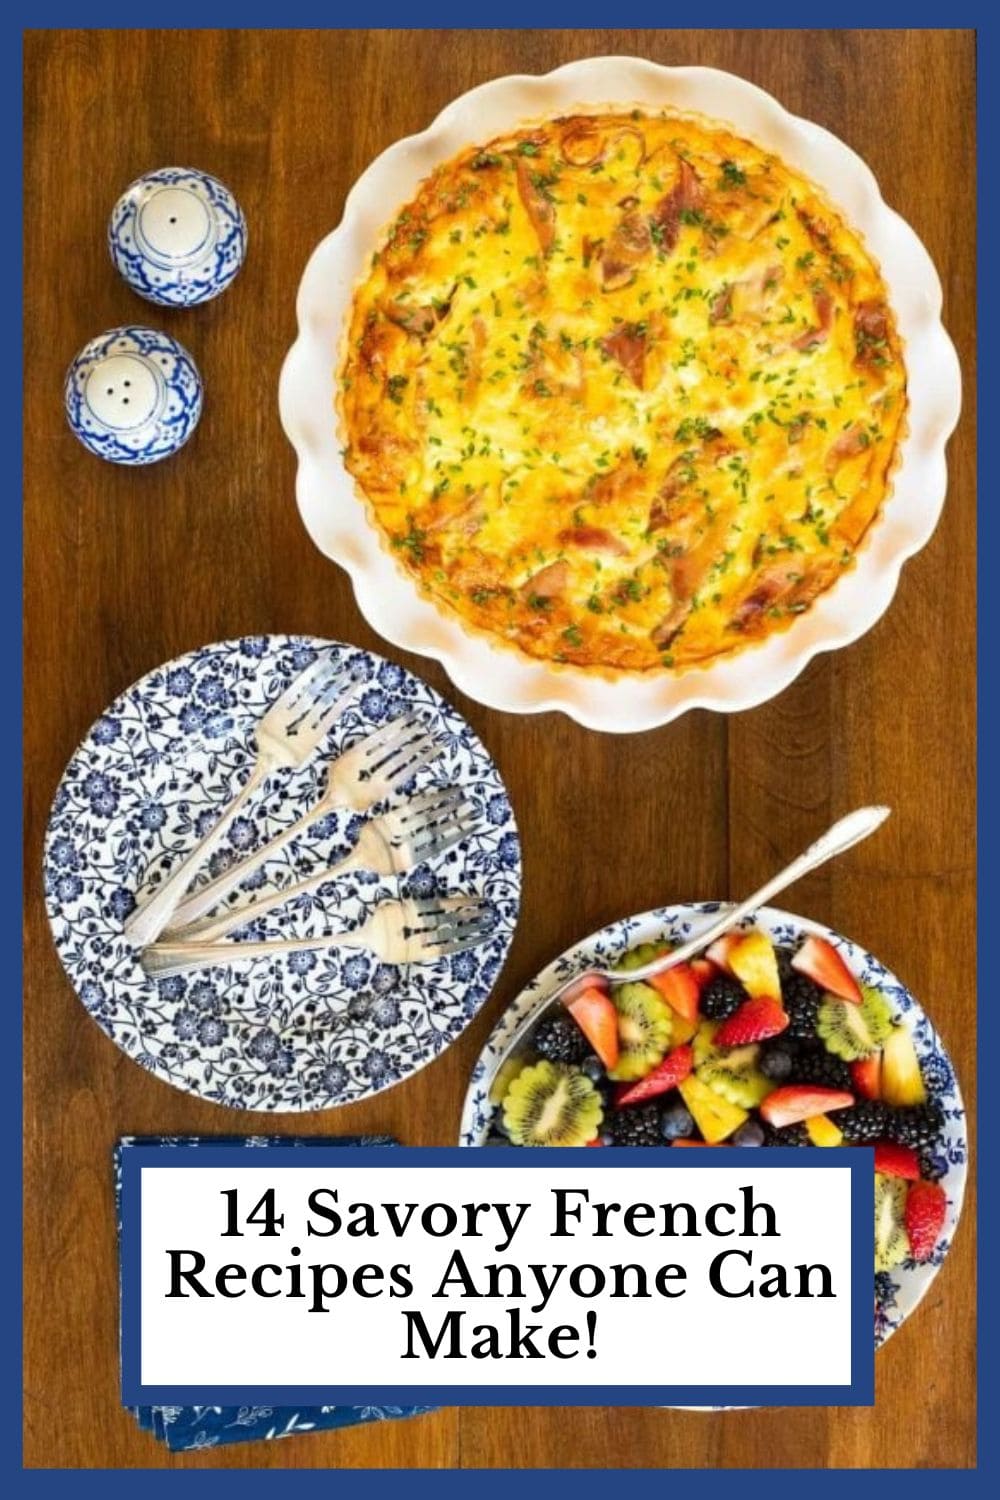 14 Savory French Recipes - When You Want to Feel a Little Fancy But Don\'t Have Much Time